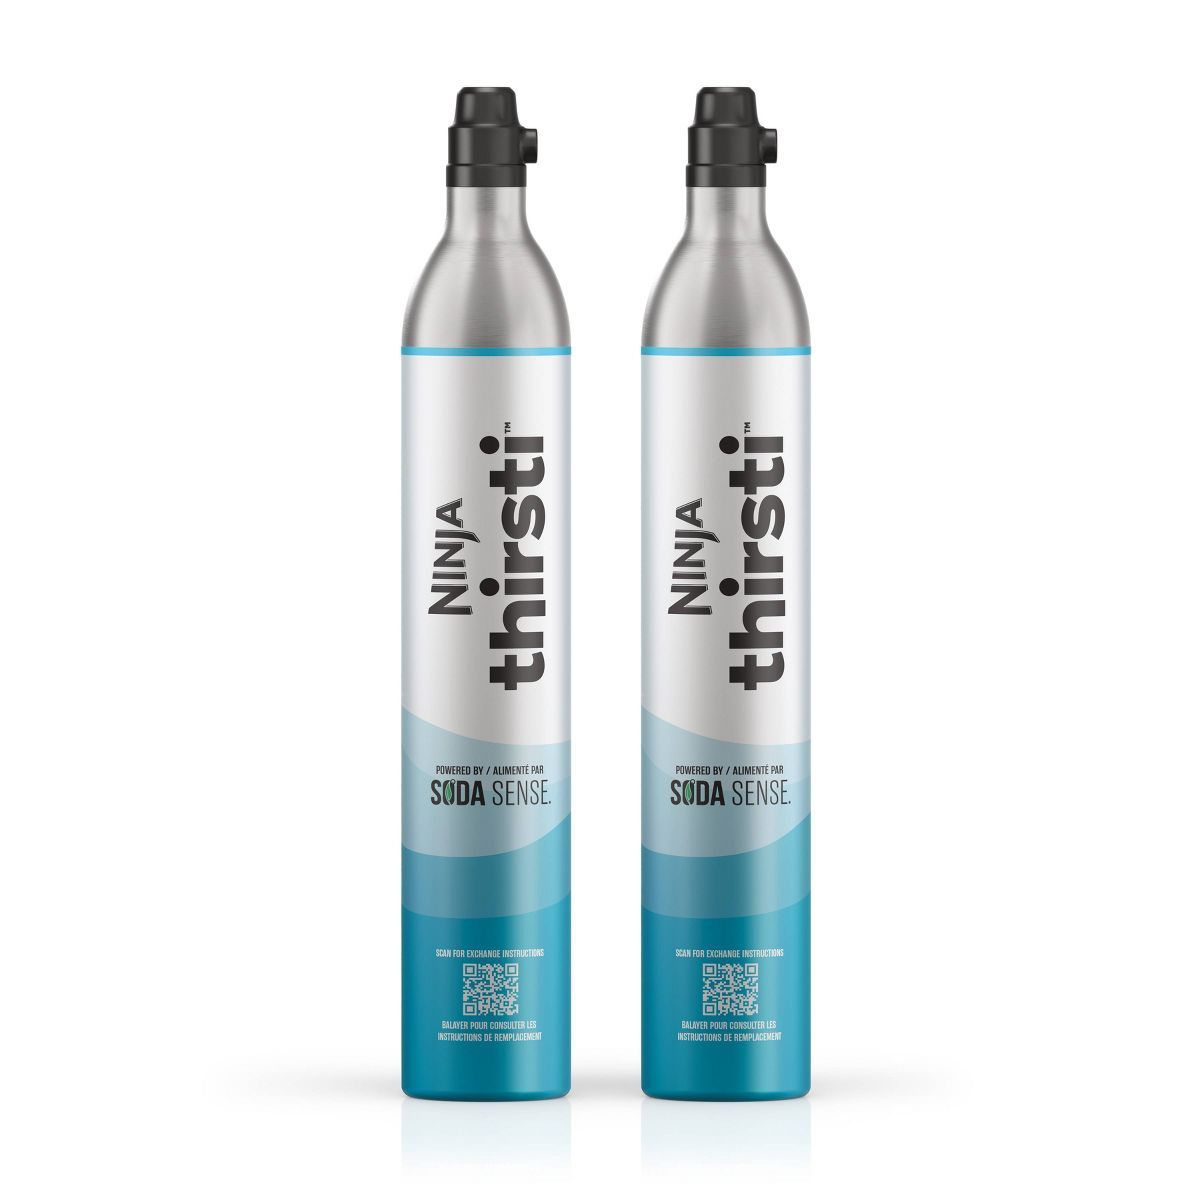 Ninja Thirsti 60L CO2 Canister 2-Pack, Designed exclusively for the Ninja Thirsti Drink System - ... | Target